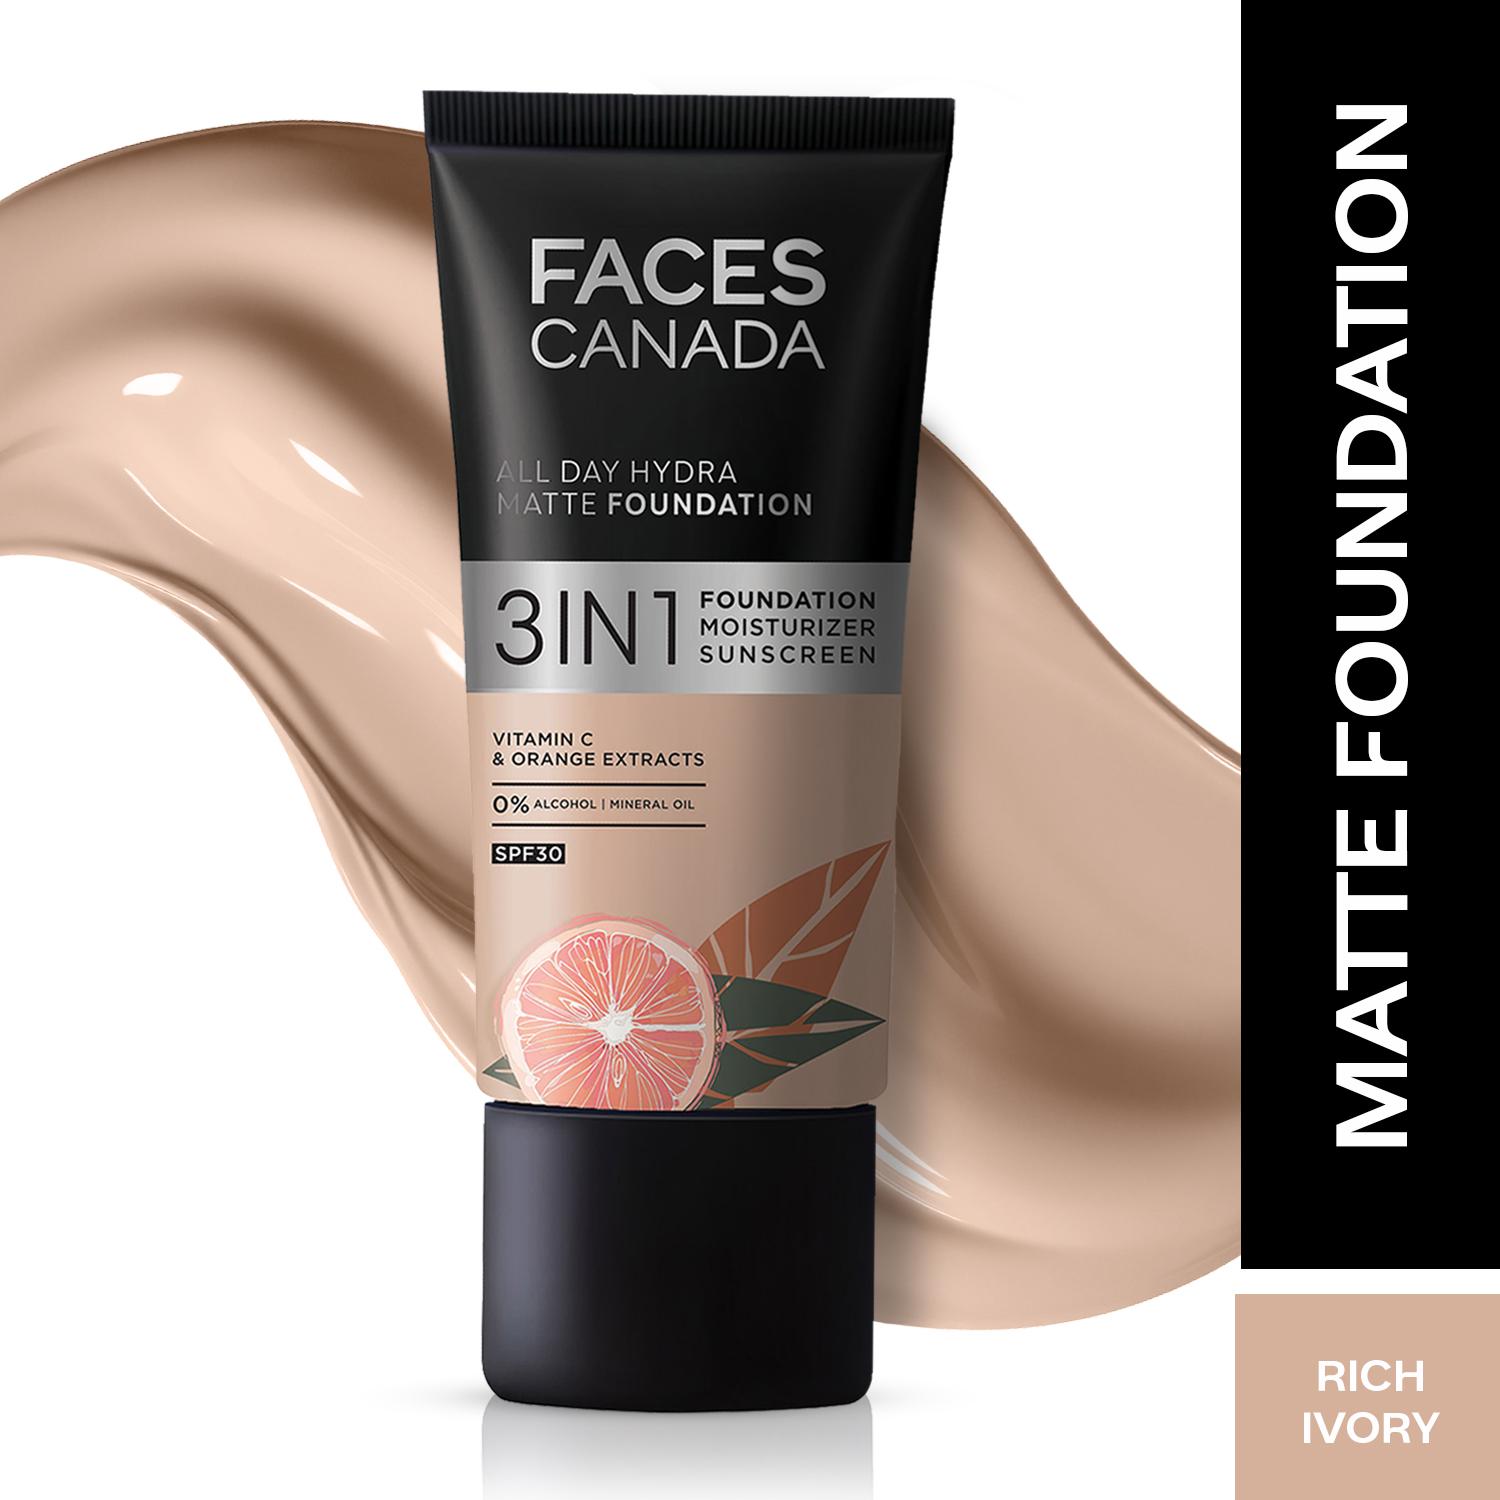 Faces Canada | Faces Canada 3in1 All Day Hydra Matte Foundation + Moisturizer + SPF 30 - Rich Ivory 013 (25 ml)